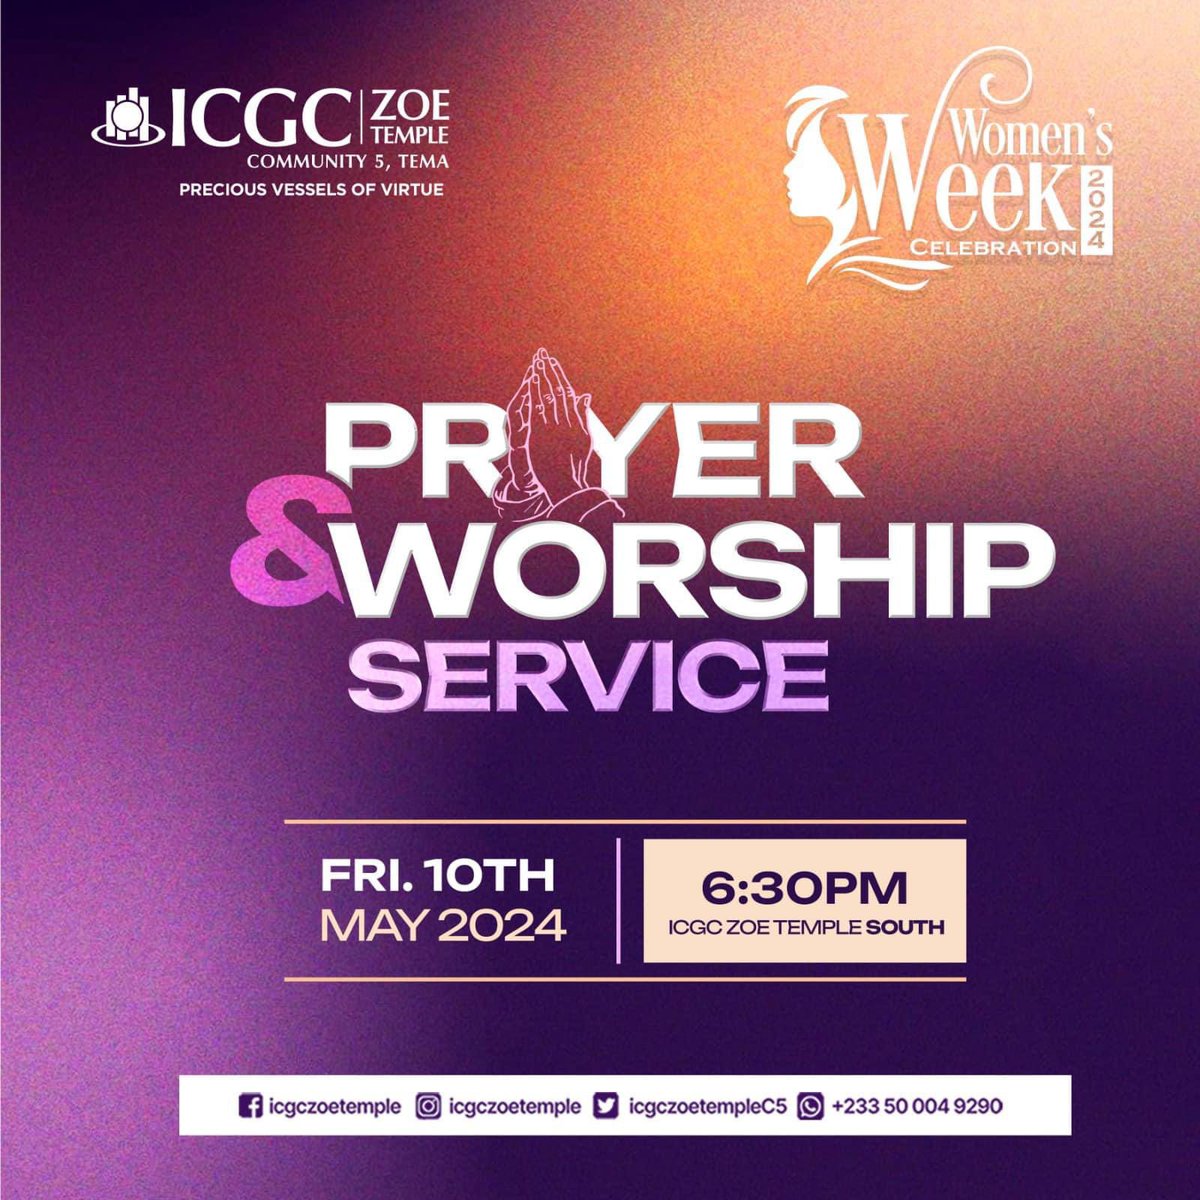 WOMEN'S WEEK PRAYER AND WORSHIP SERVICE Join us this Friday, 10 May 2024 at 6:30 PM for a moment of Prayer & Worship Service! Let's celebrate strength, faith, and sisterhood together. All are welcome! Venue: ICGC Zoe South #ICGCZoeTemple #WomensWeekCelebration